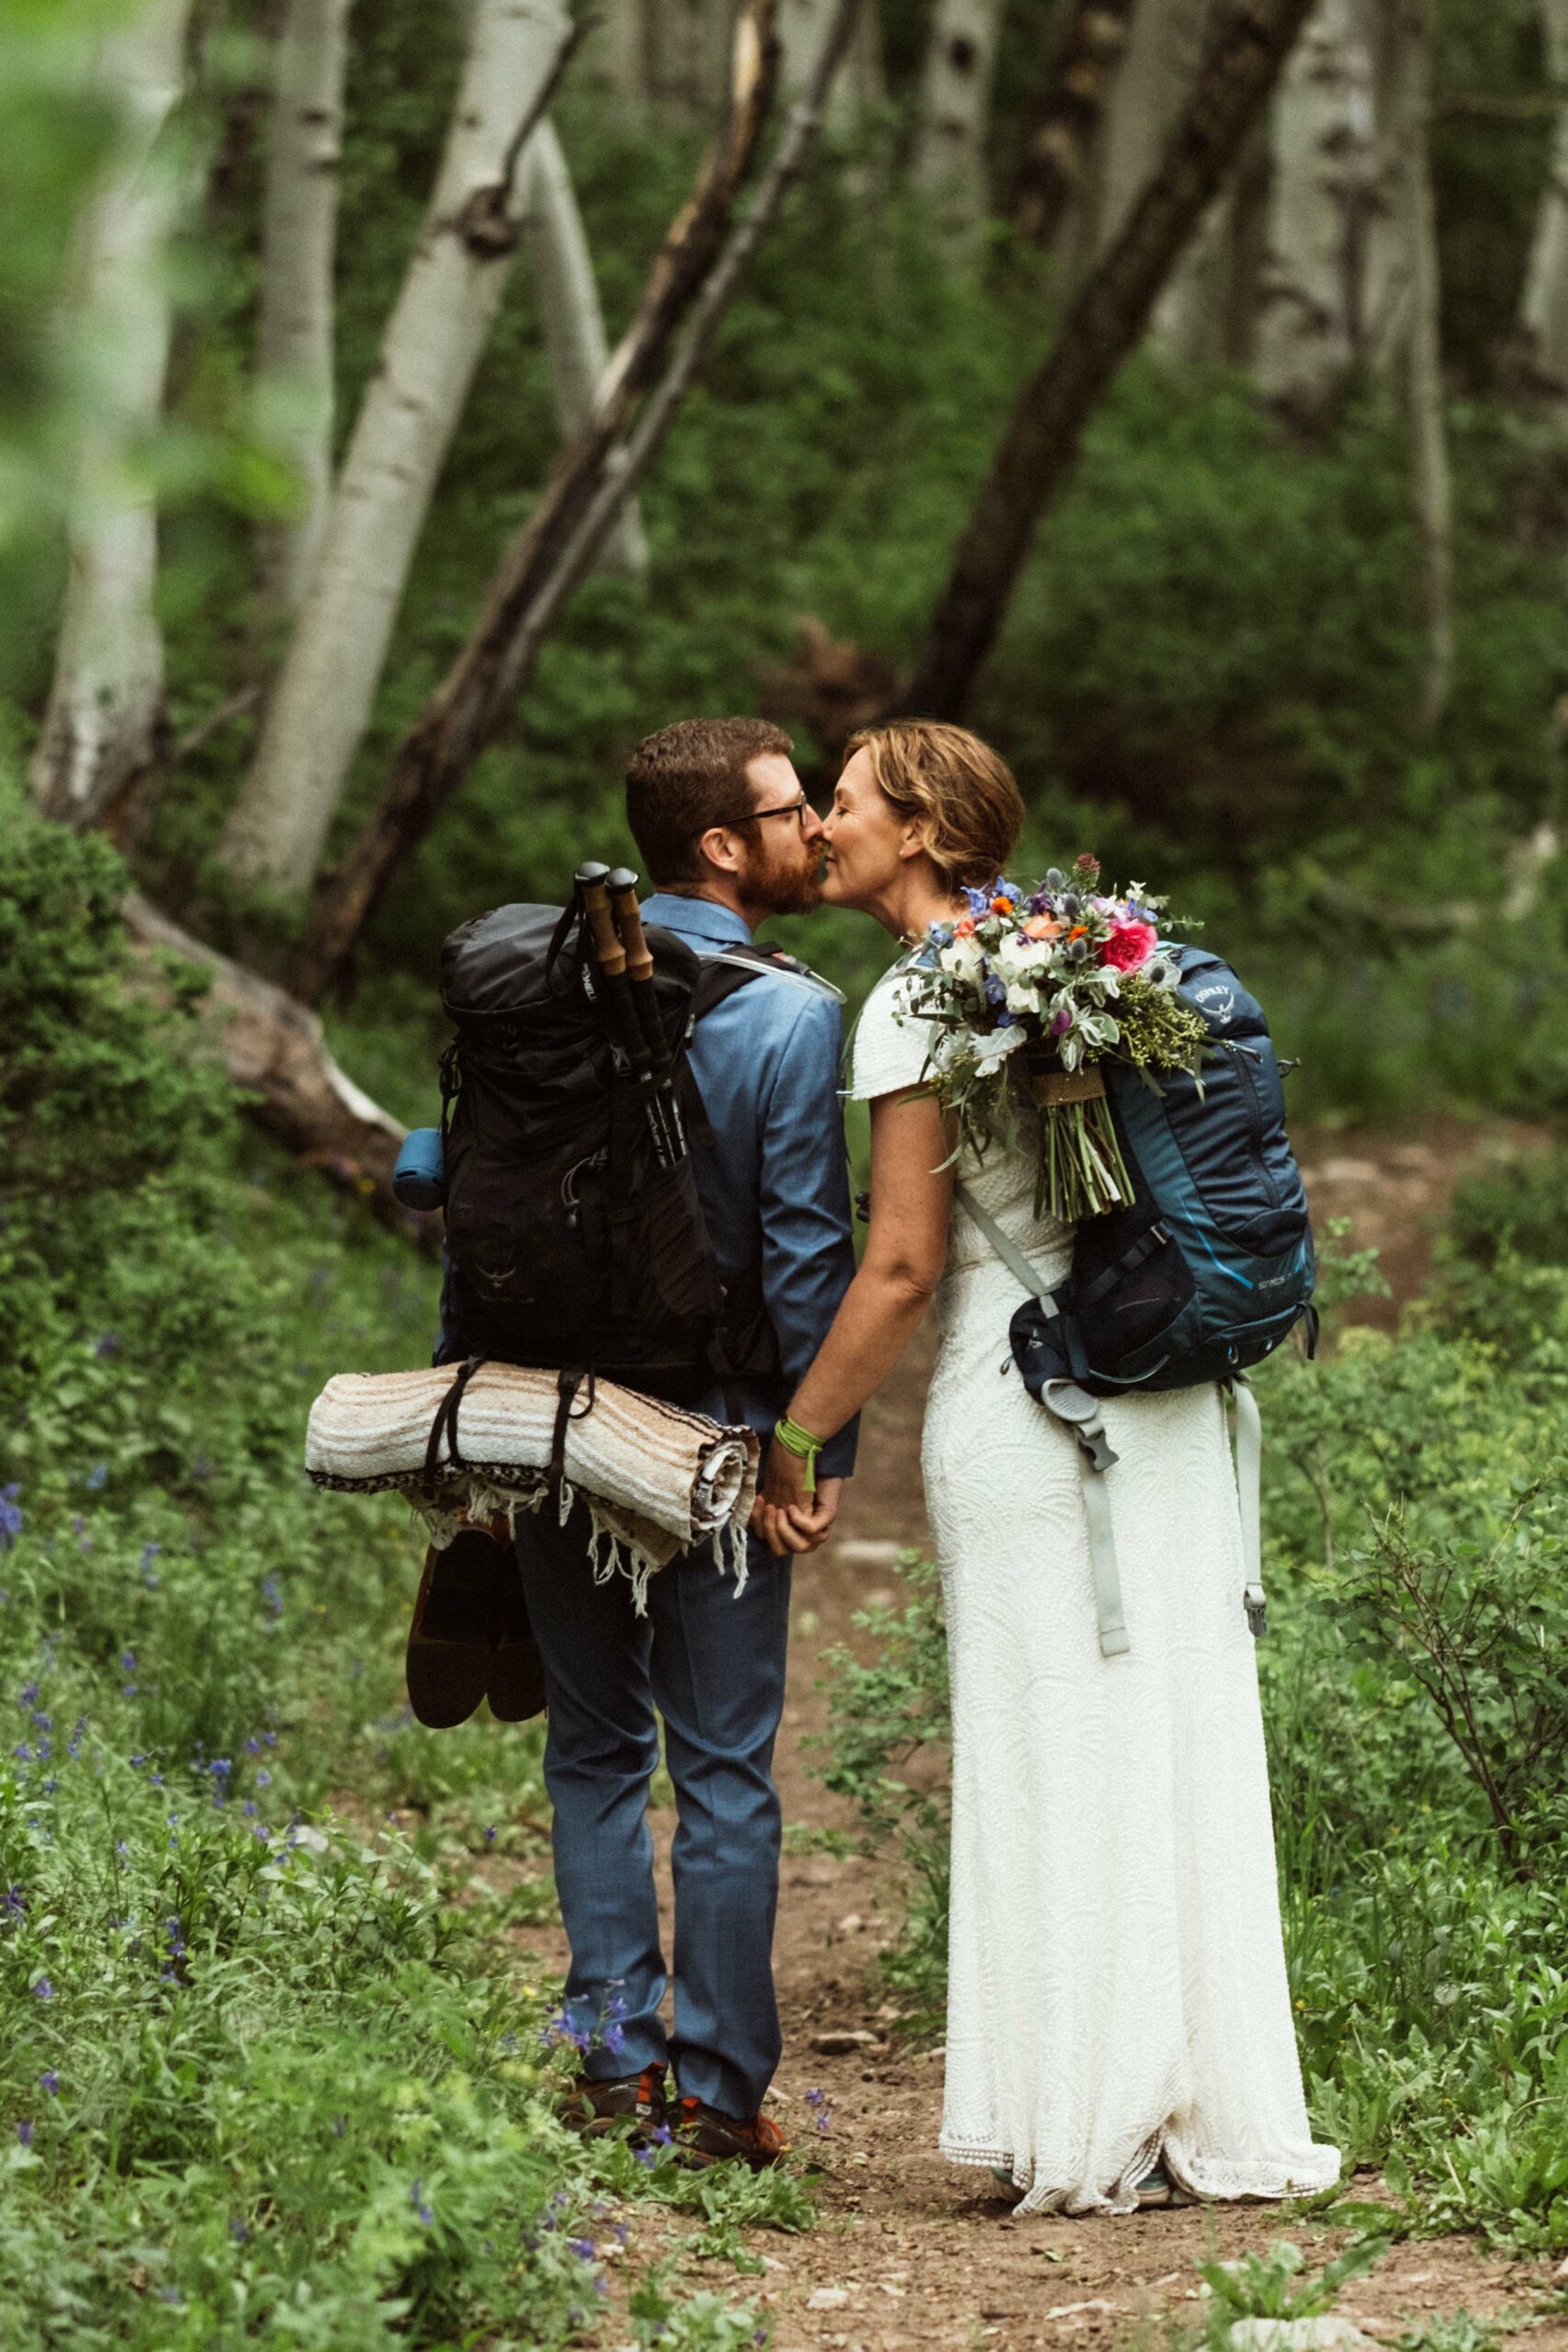 A Wedding Hike – How to Hike in Wedding Attire